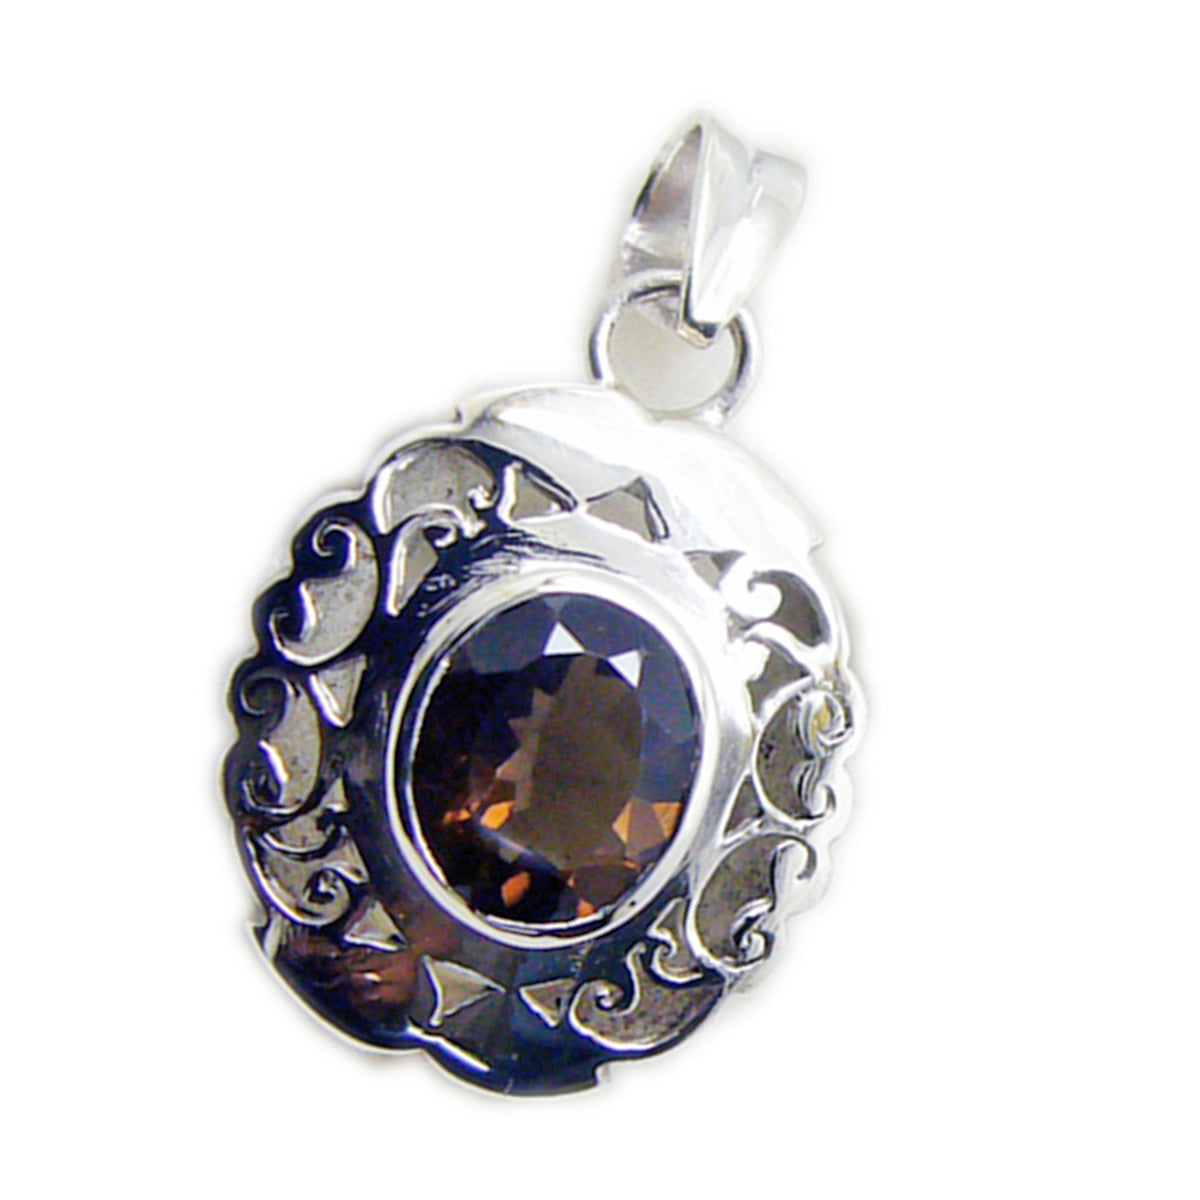 Riyo Glamorous Gems Oval Faceted Brown Smoky Quartz Silver Pendant Gift For Engagement